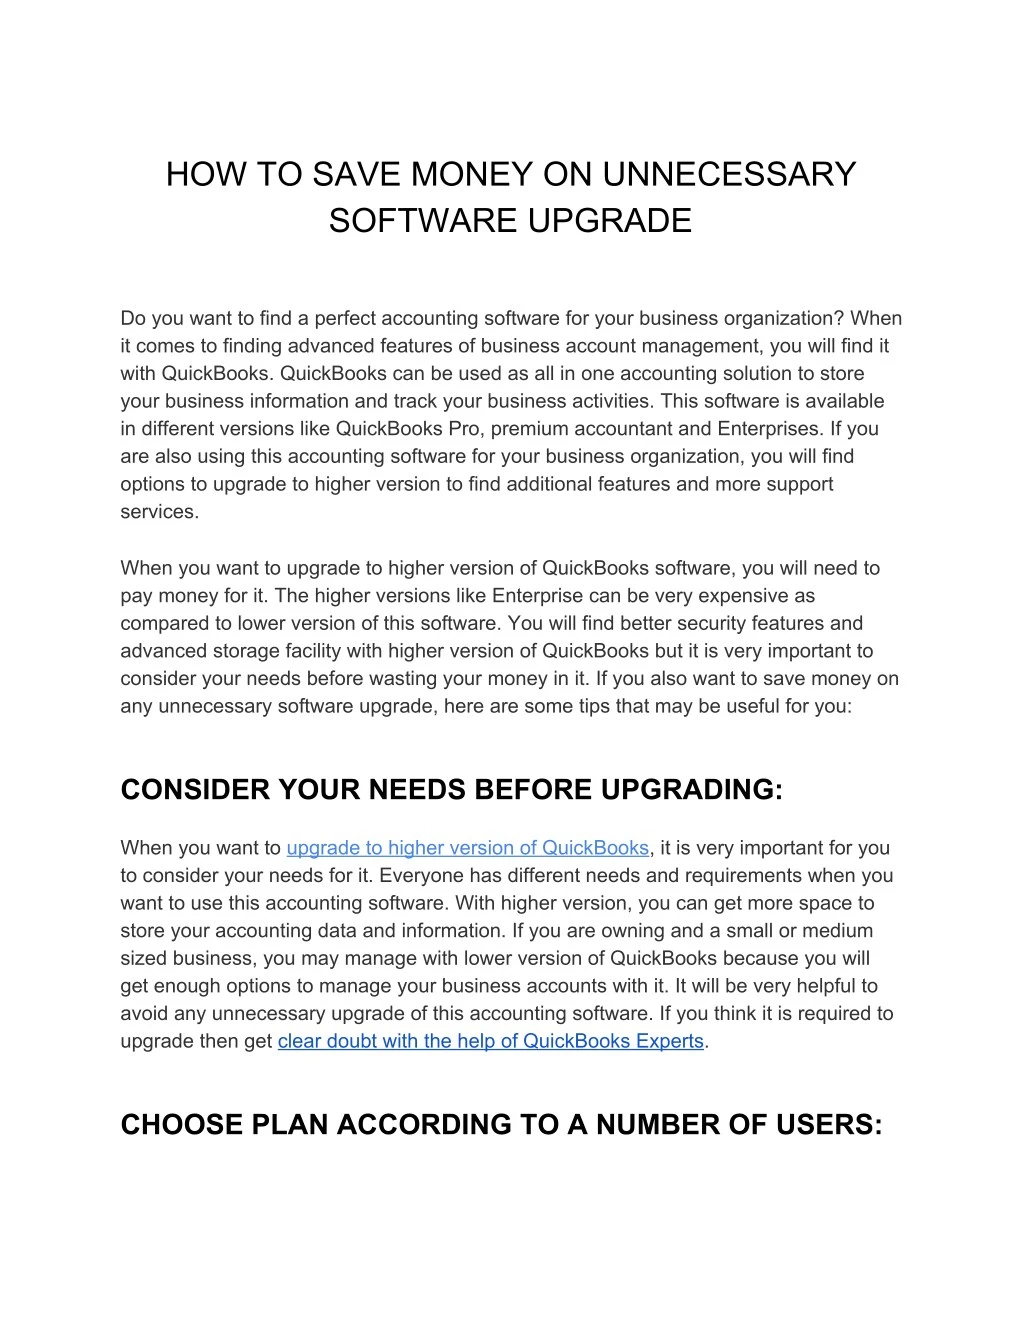 how to save money on unnecessary software upgrade